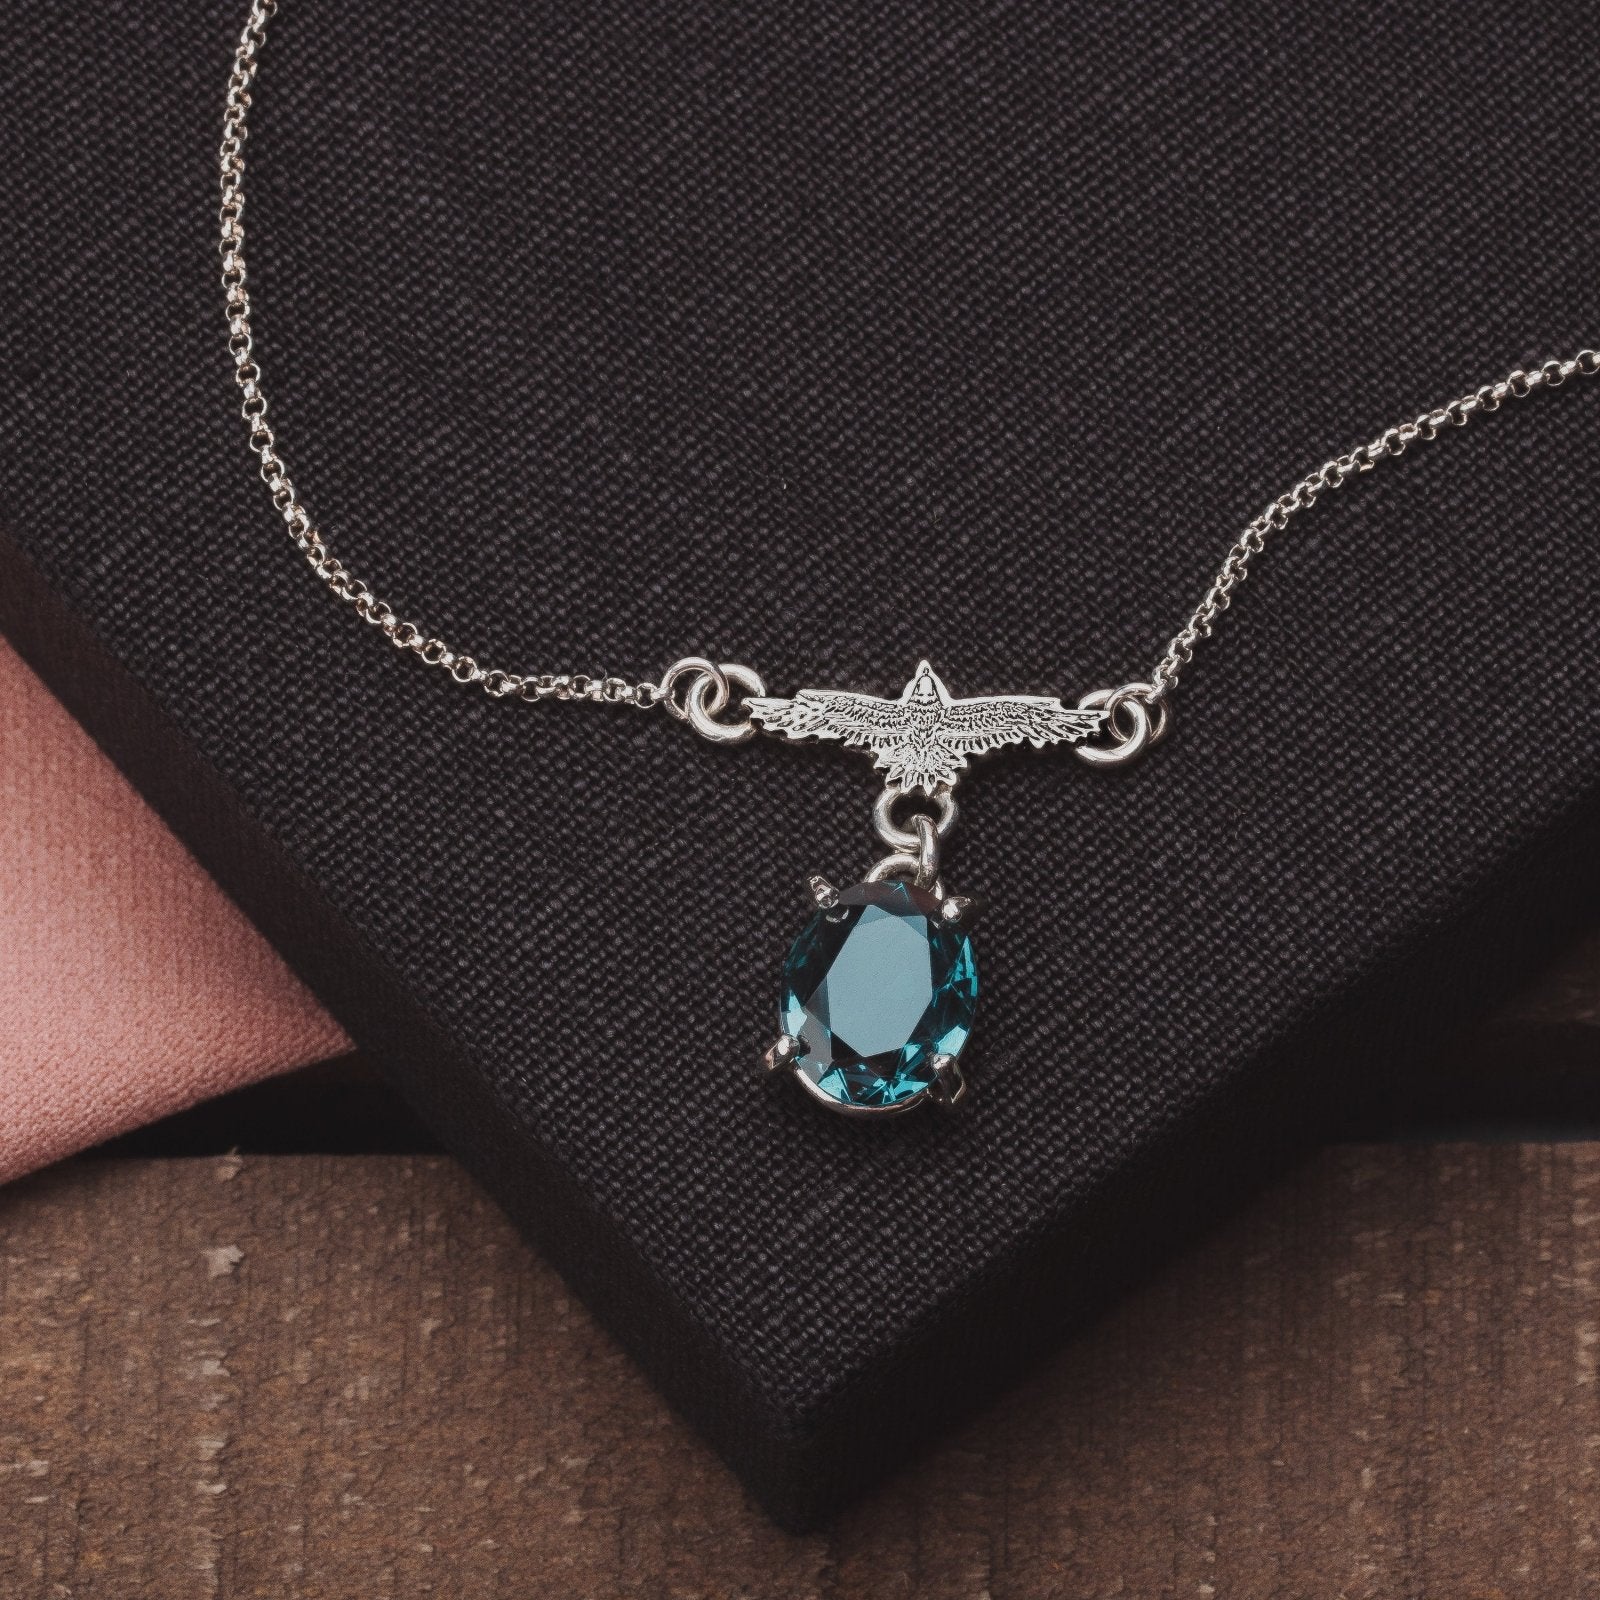 Raven Necklace With Teal Blue Topaz - Melanie Golden Jewelry - fauna, gemstone necklace, necklace, necklaces, symbolic, The River Valley Collection